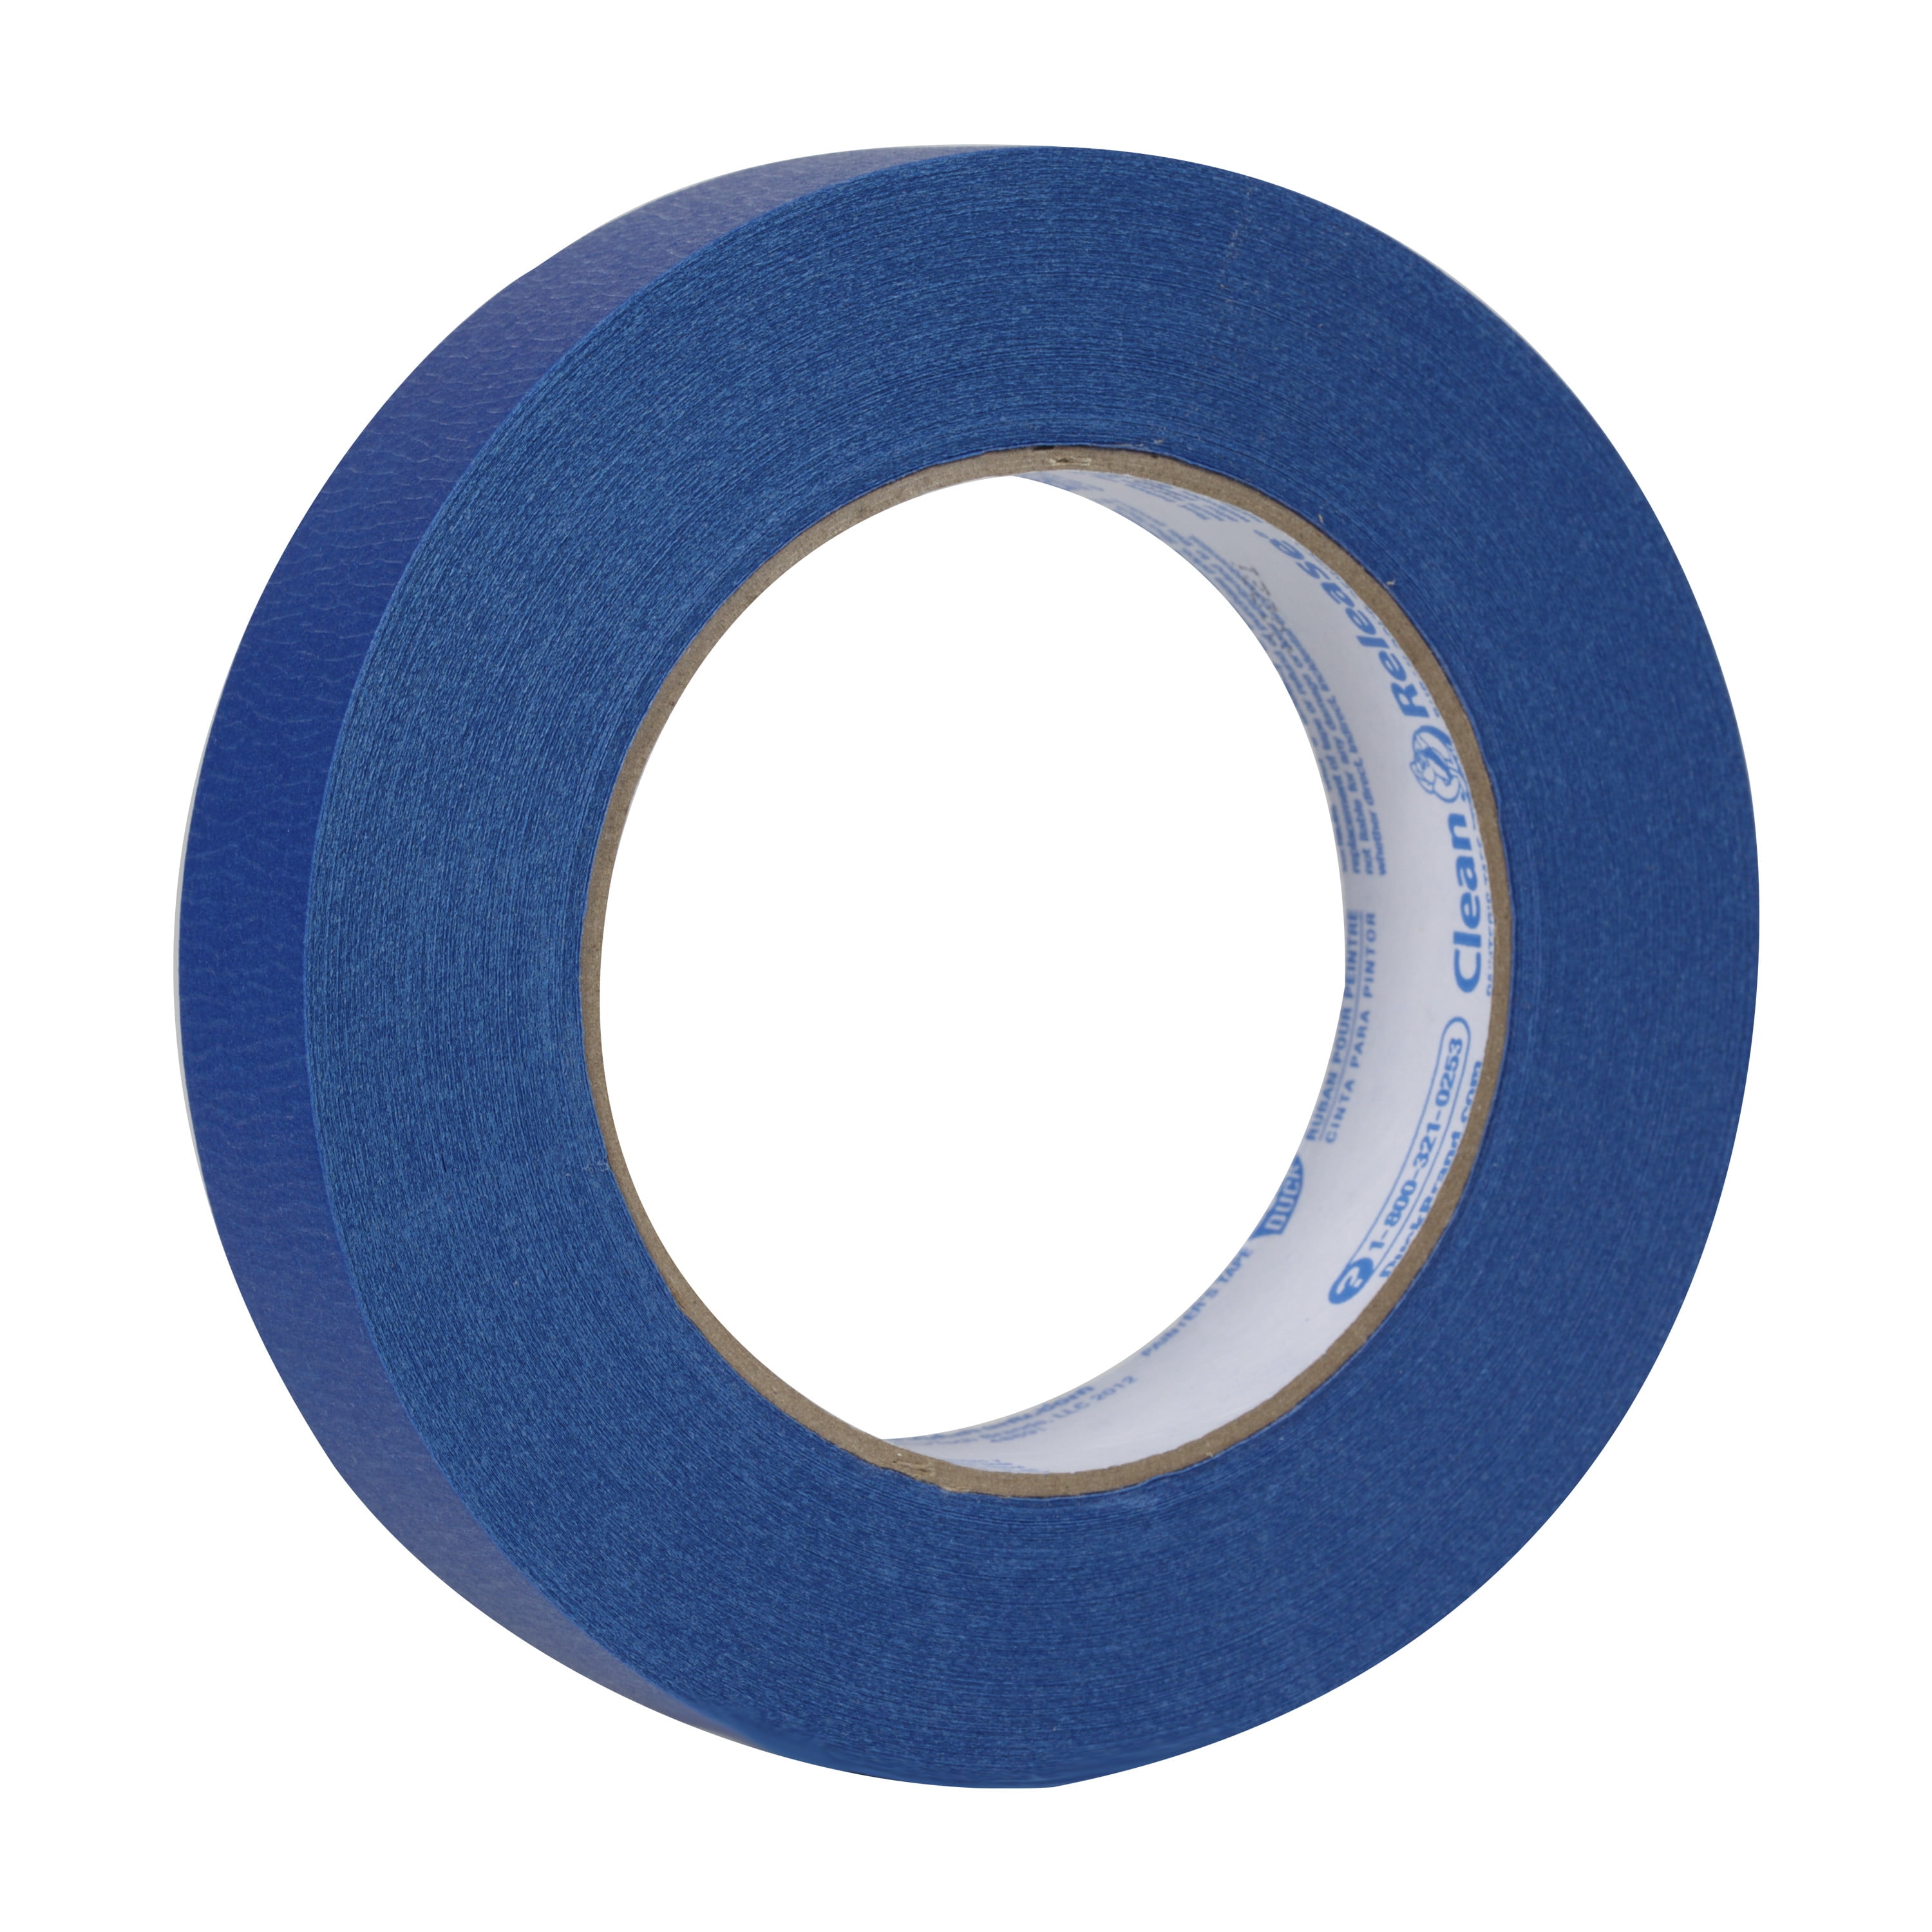 x 60 Yard FRESHLAND 14 Day Clean Release Painters Tape 18mm Painter’s Tape Blue Painter Tape Blue Masking Tape 3-Pack 0.71 Thin Paint Tape Paint Tape Blue Tape 